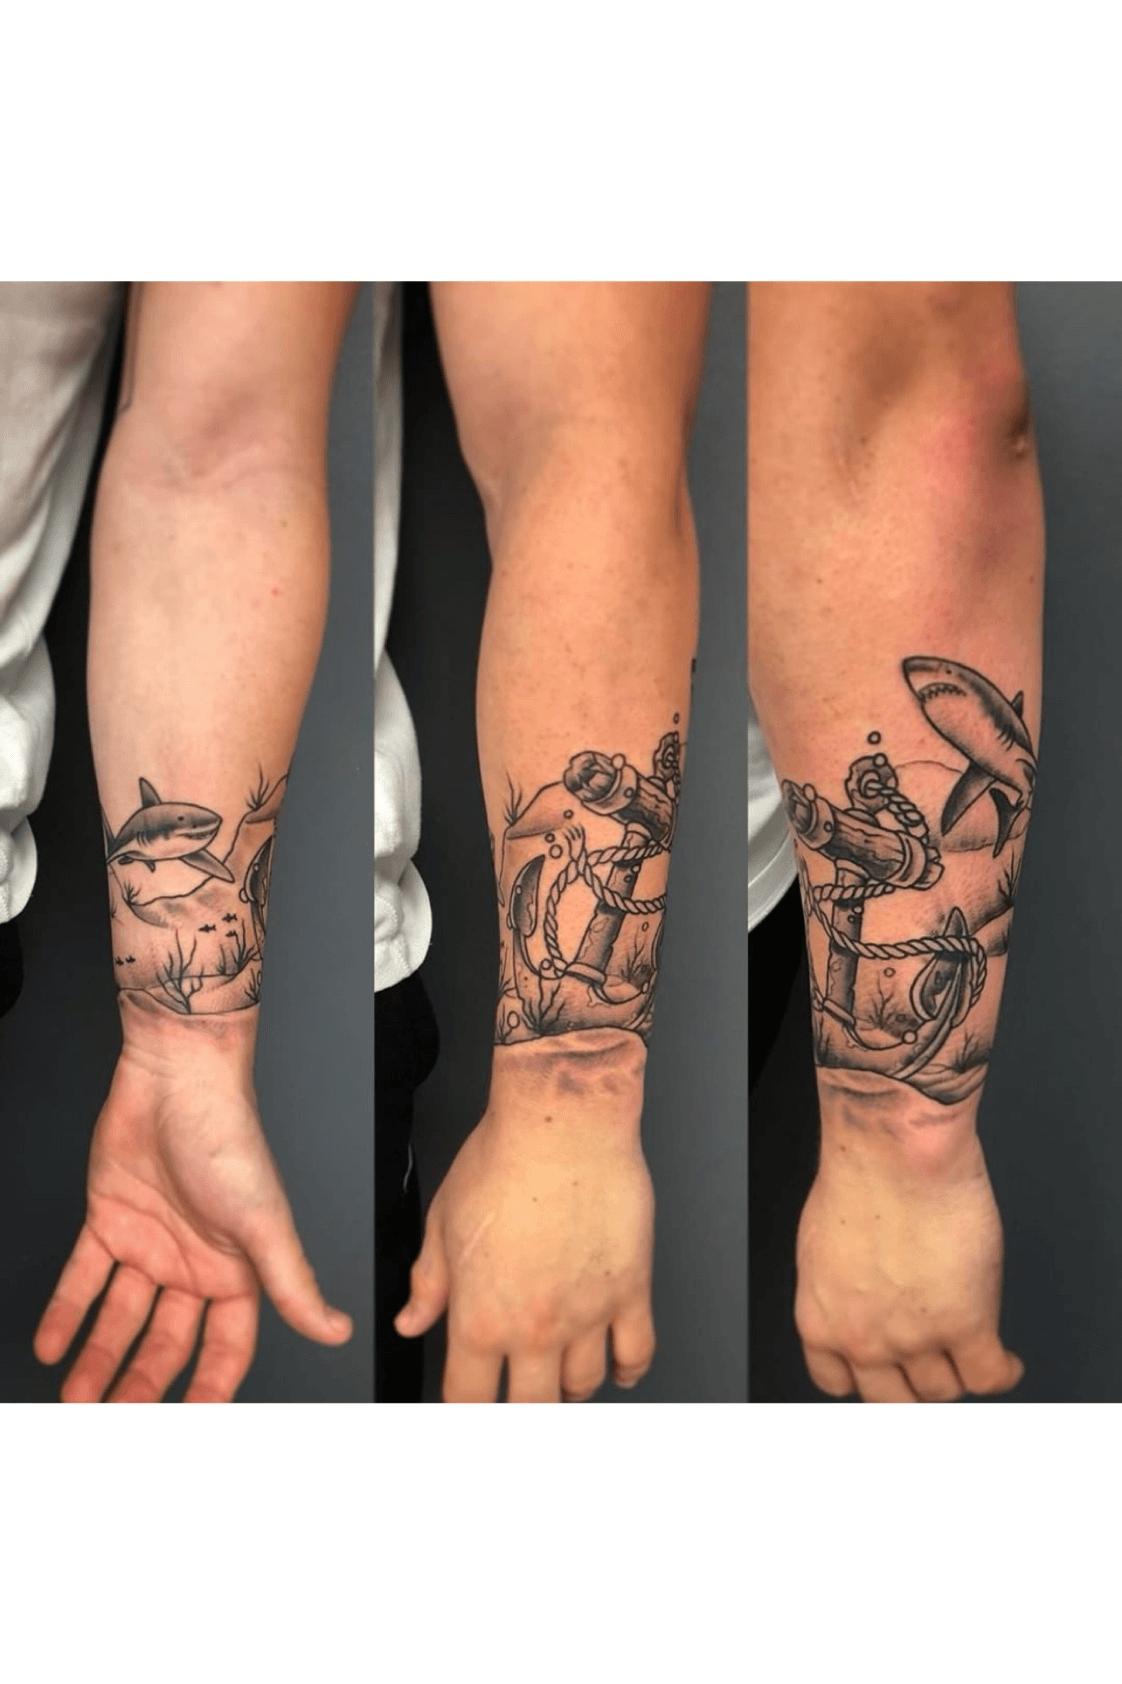 A Comprehensive Guide to Sleeve Tattoos by Chronic Ink Tattoo